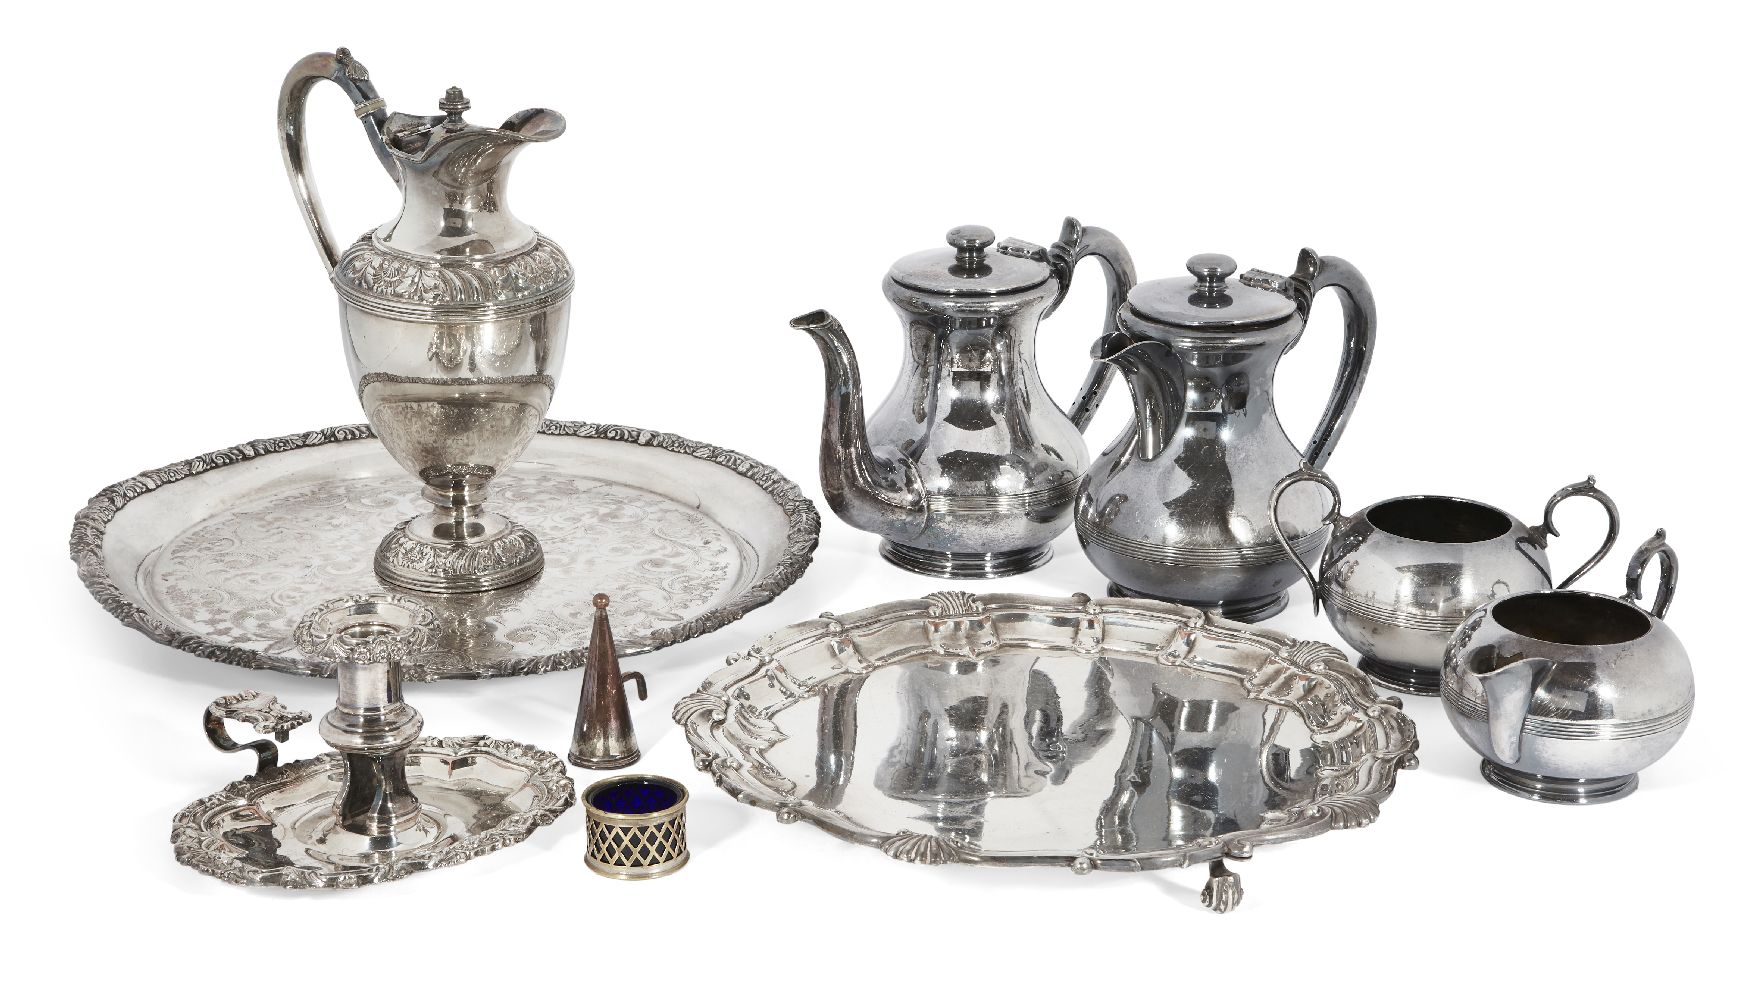 A group of silver plated items comprising: a Walker & Hall silver plated tea set (tea pot, hot water